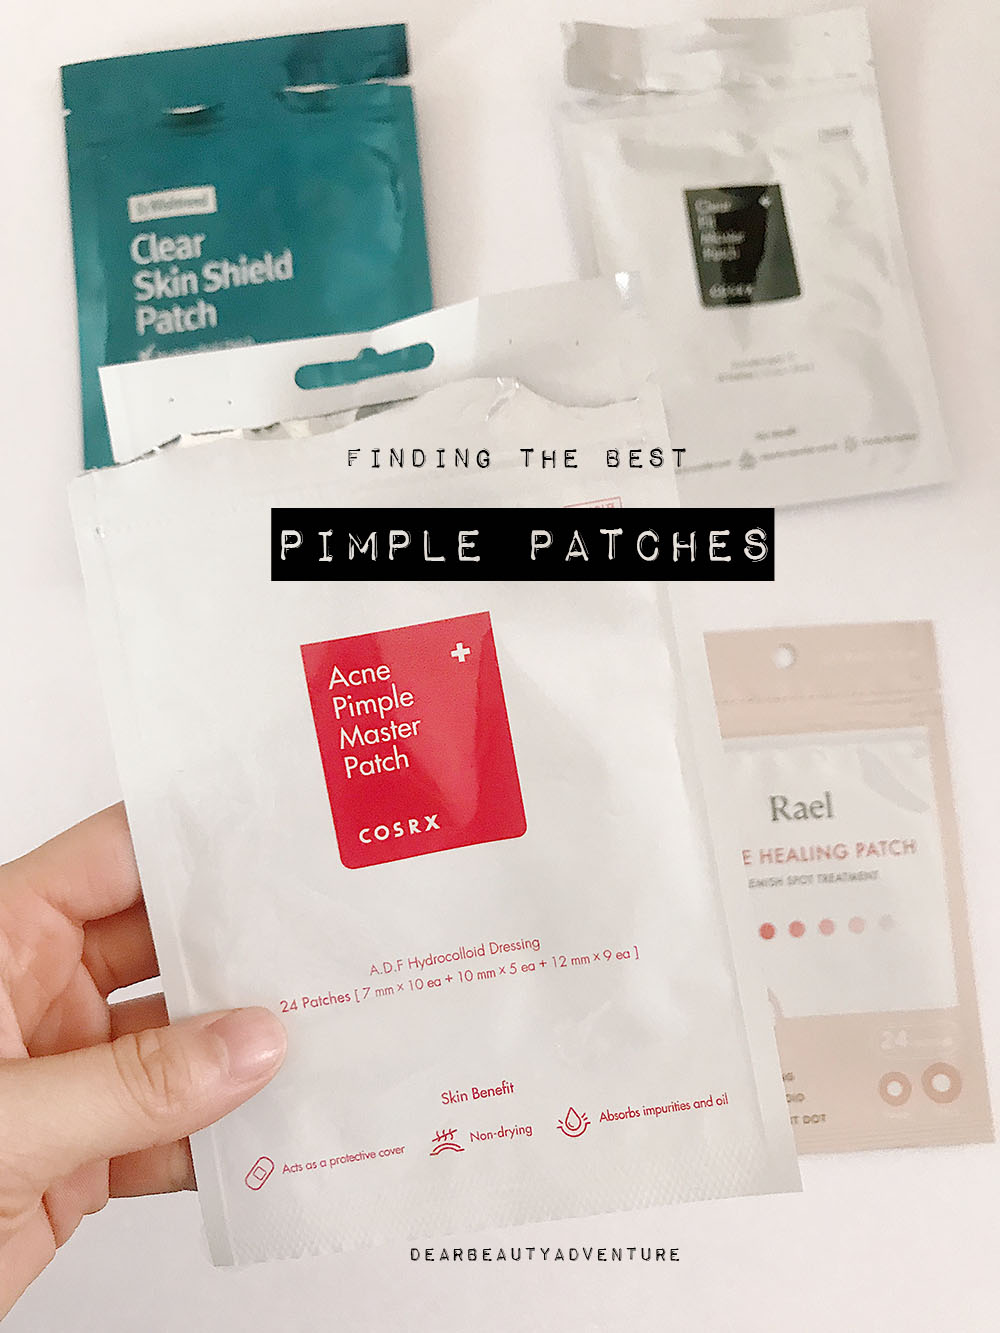 Do you ever wonder which pimple patches are the best. Check out this post while I compare Cosrx, Rael, ByWishtrend